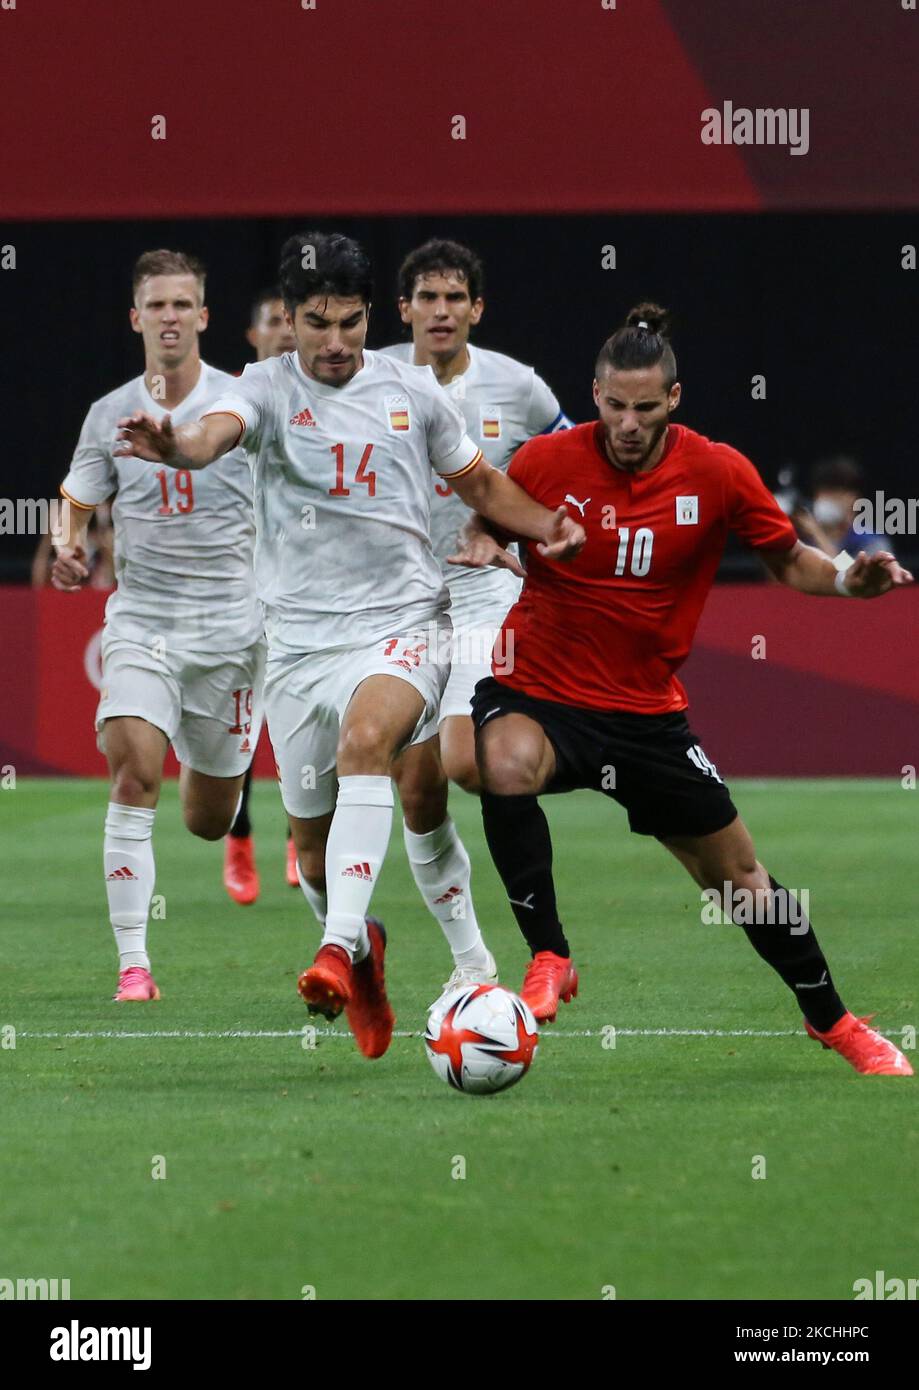 (10) Ramadan SOBHI of Team Egypt battles for possession with (14) Carlos SOLER of Team Spain during the Men's First Round Group C match between Egypt and Spain during the Tokyo 2020 Olympic Games at Sapporo Dome Stadium 22 July 2021 (Photo by Ayman Aref/NurPhoto) Stock Photo